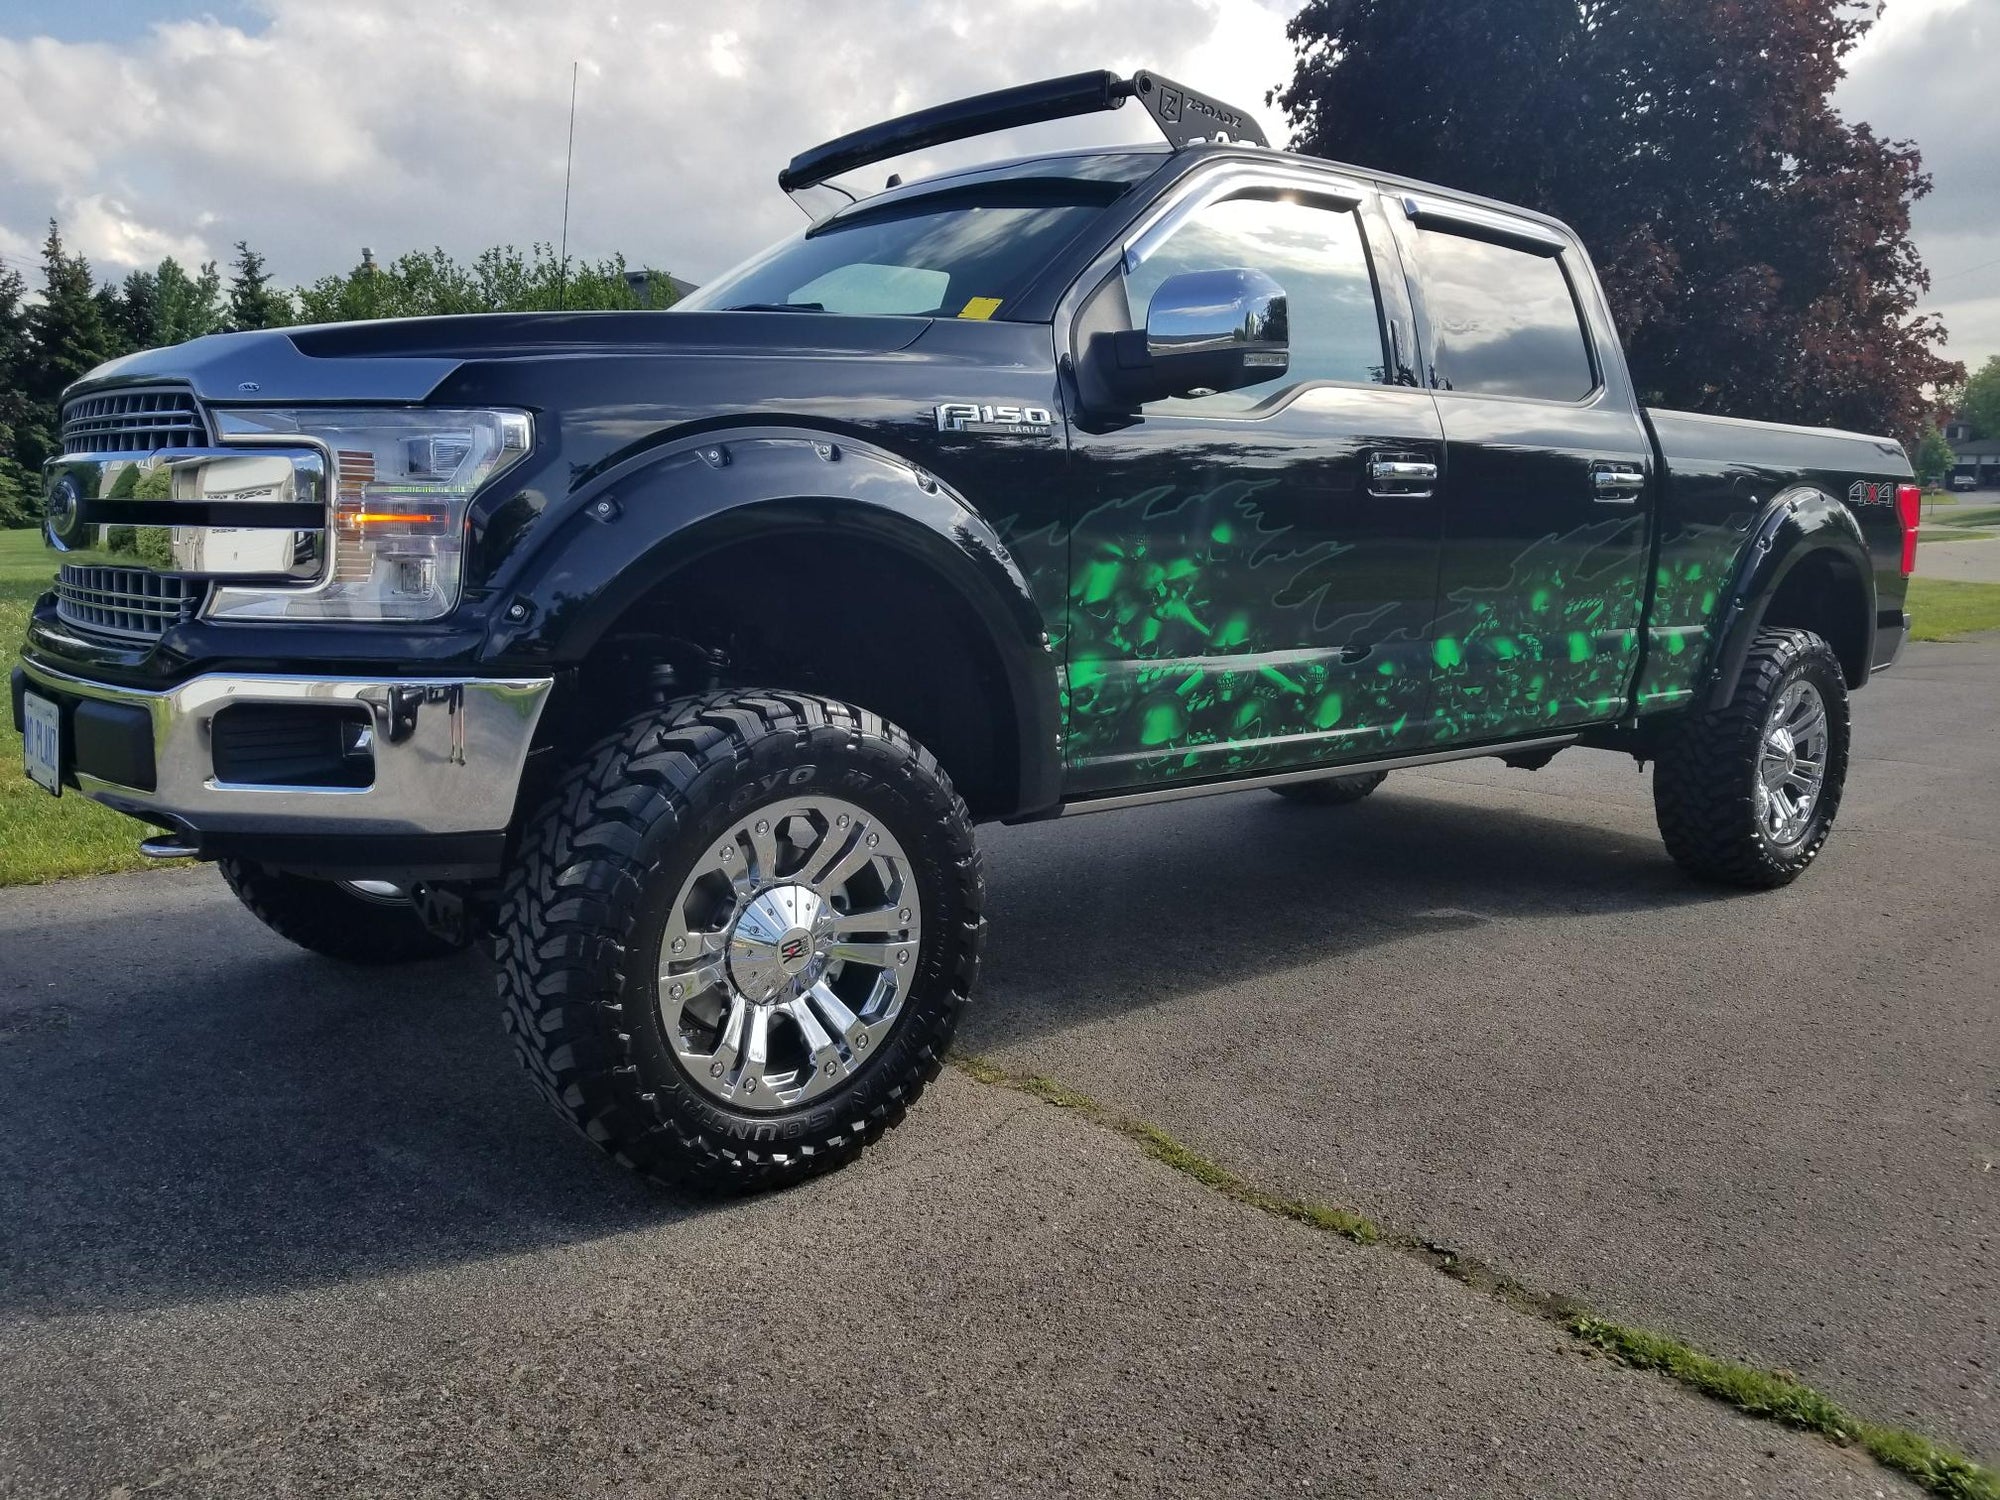 Neon green skulls wrap on the side of a black pick up truck